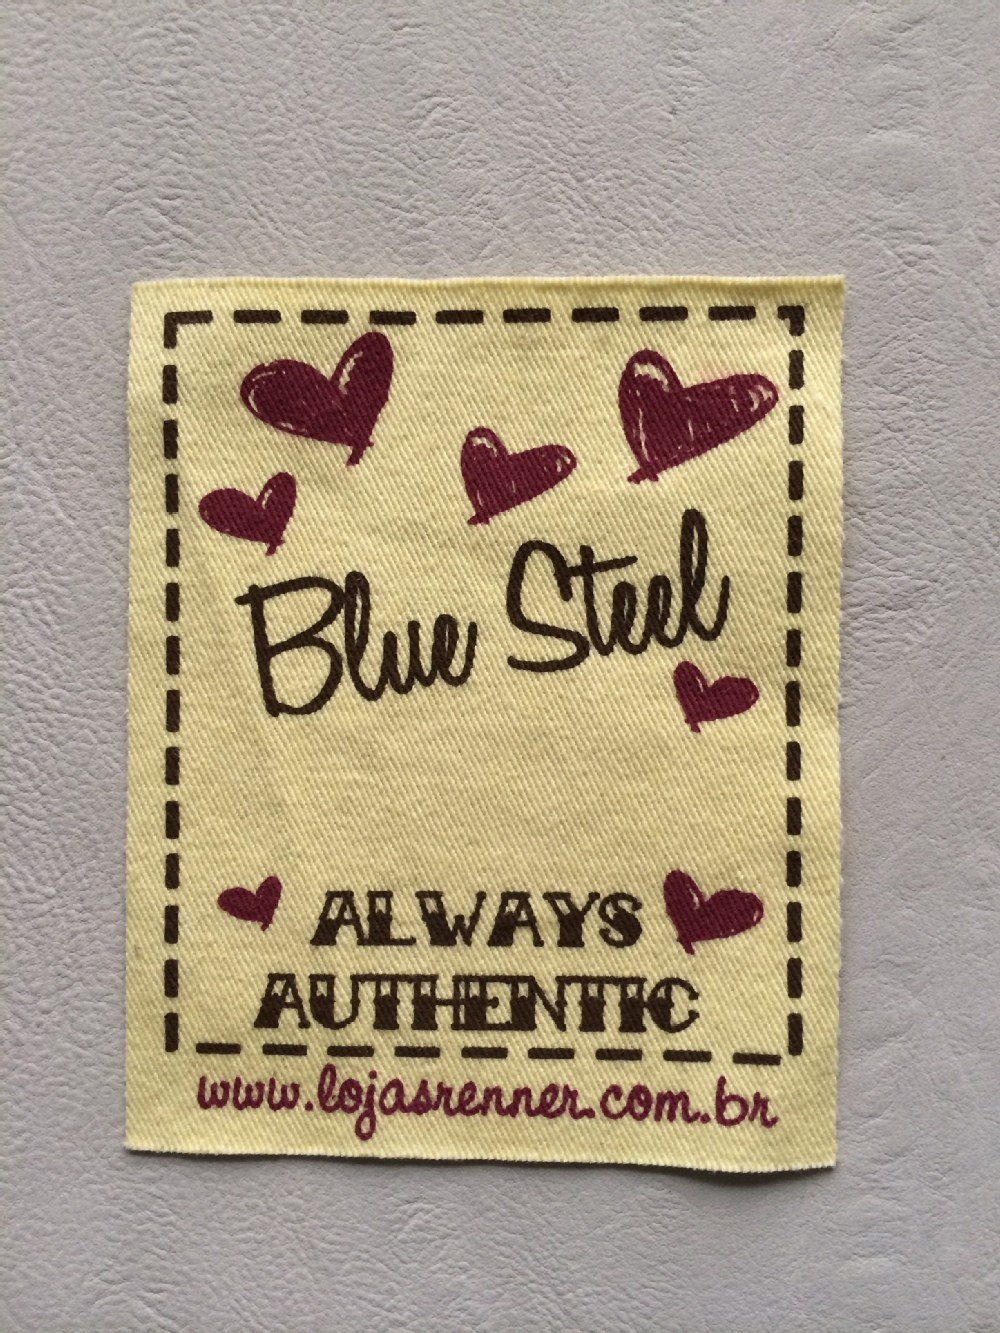 Cotton labels with silk screen printing for clothing